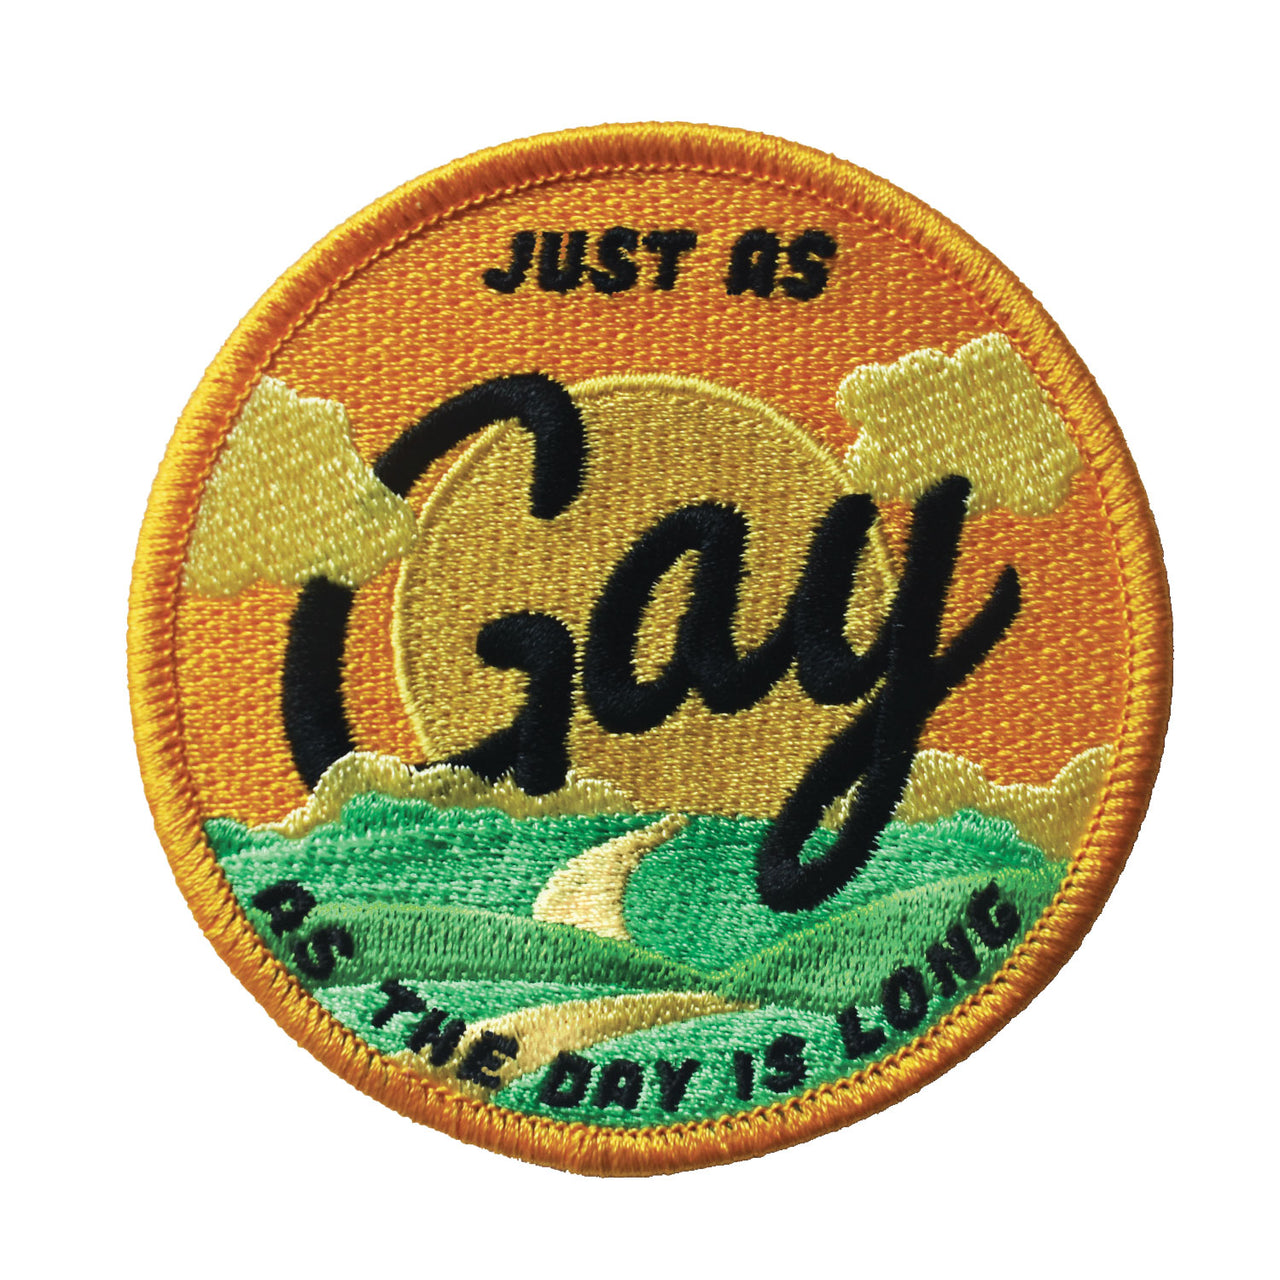 Just As Gay (Iron-On Patch)